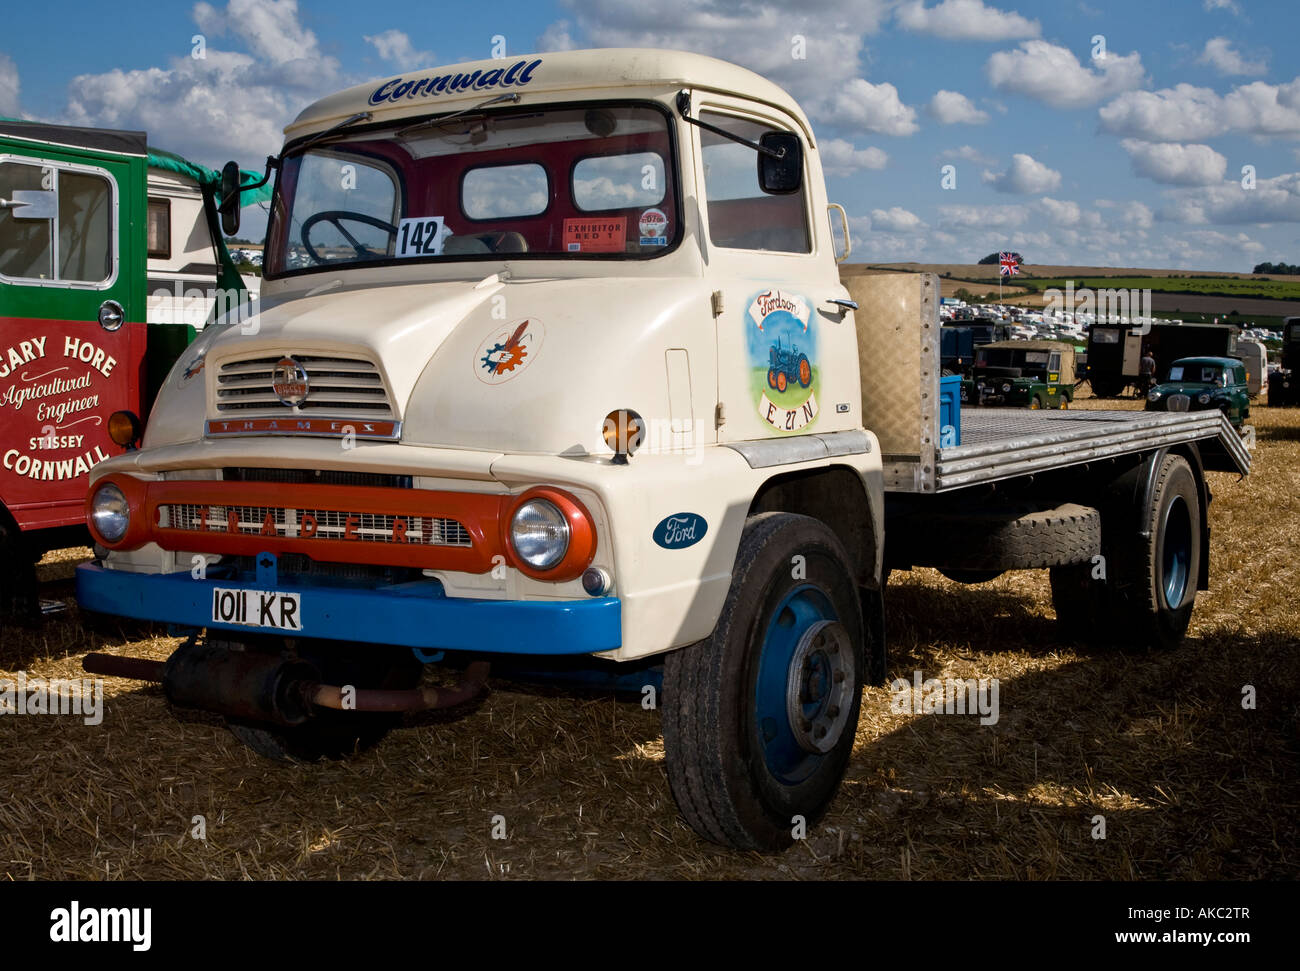 1963 Ford Thames Trader flatbed, Reg No. 1011 KR. At the Great Dorset Steam Fair, England, UK. Stock Photo